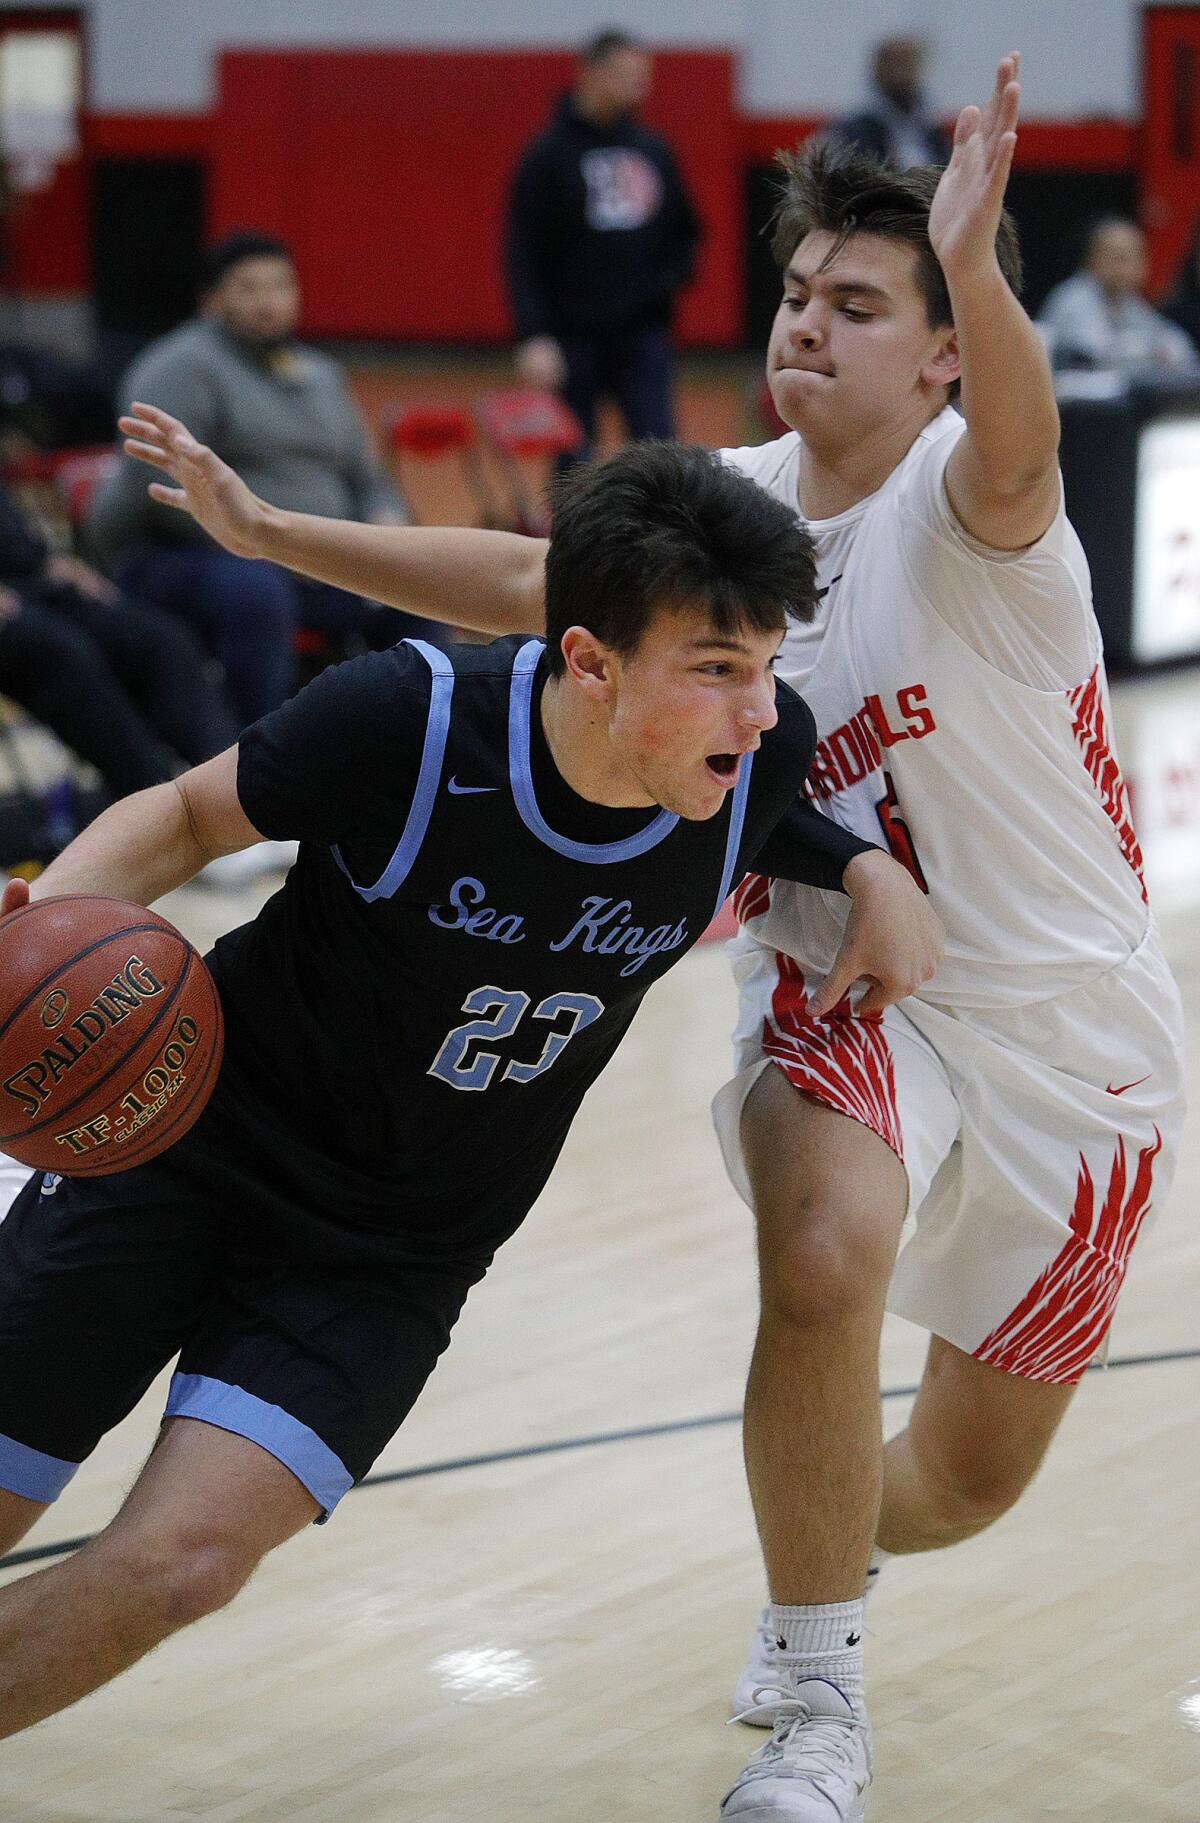 Corona del Mar's Jack Stone battles Whittier's Jeremiah Villescas on the baseline in a pool-play game of the Artesia Winter Classic on Wednesday in Lakewood.